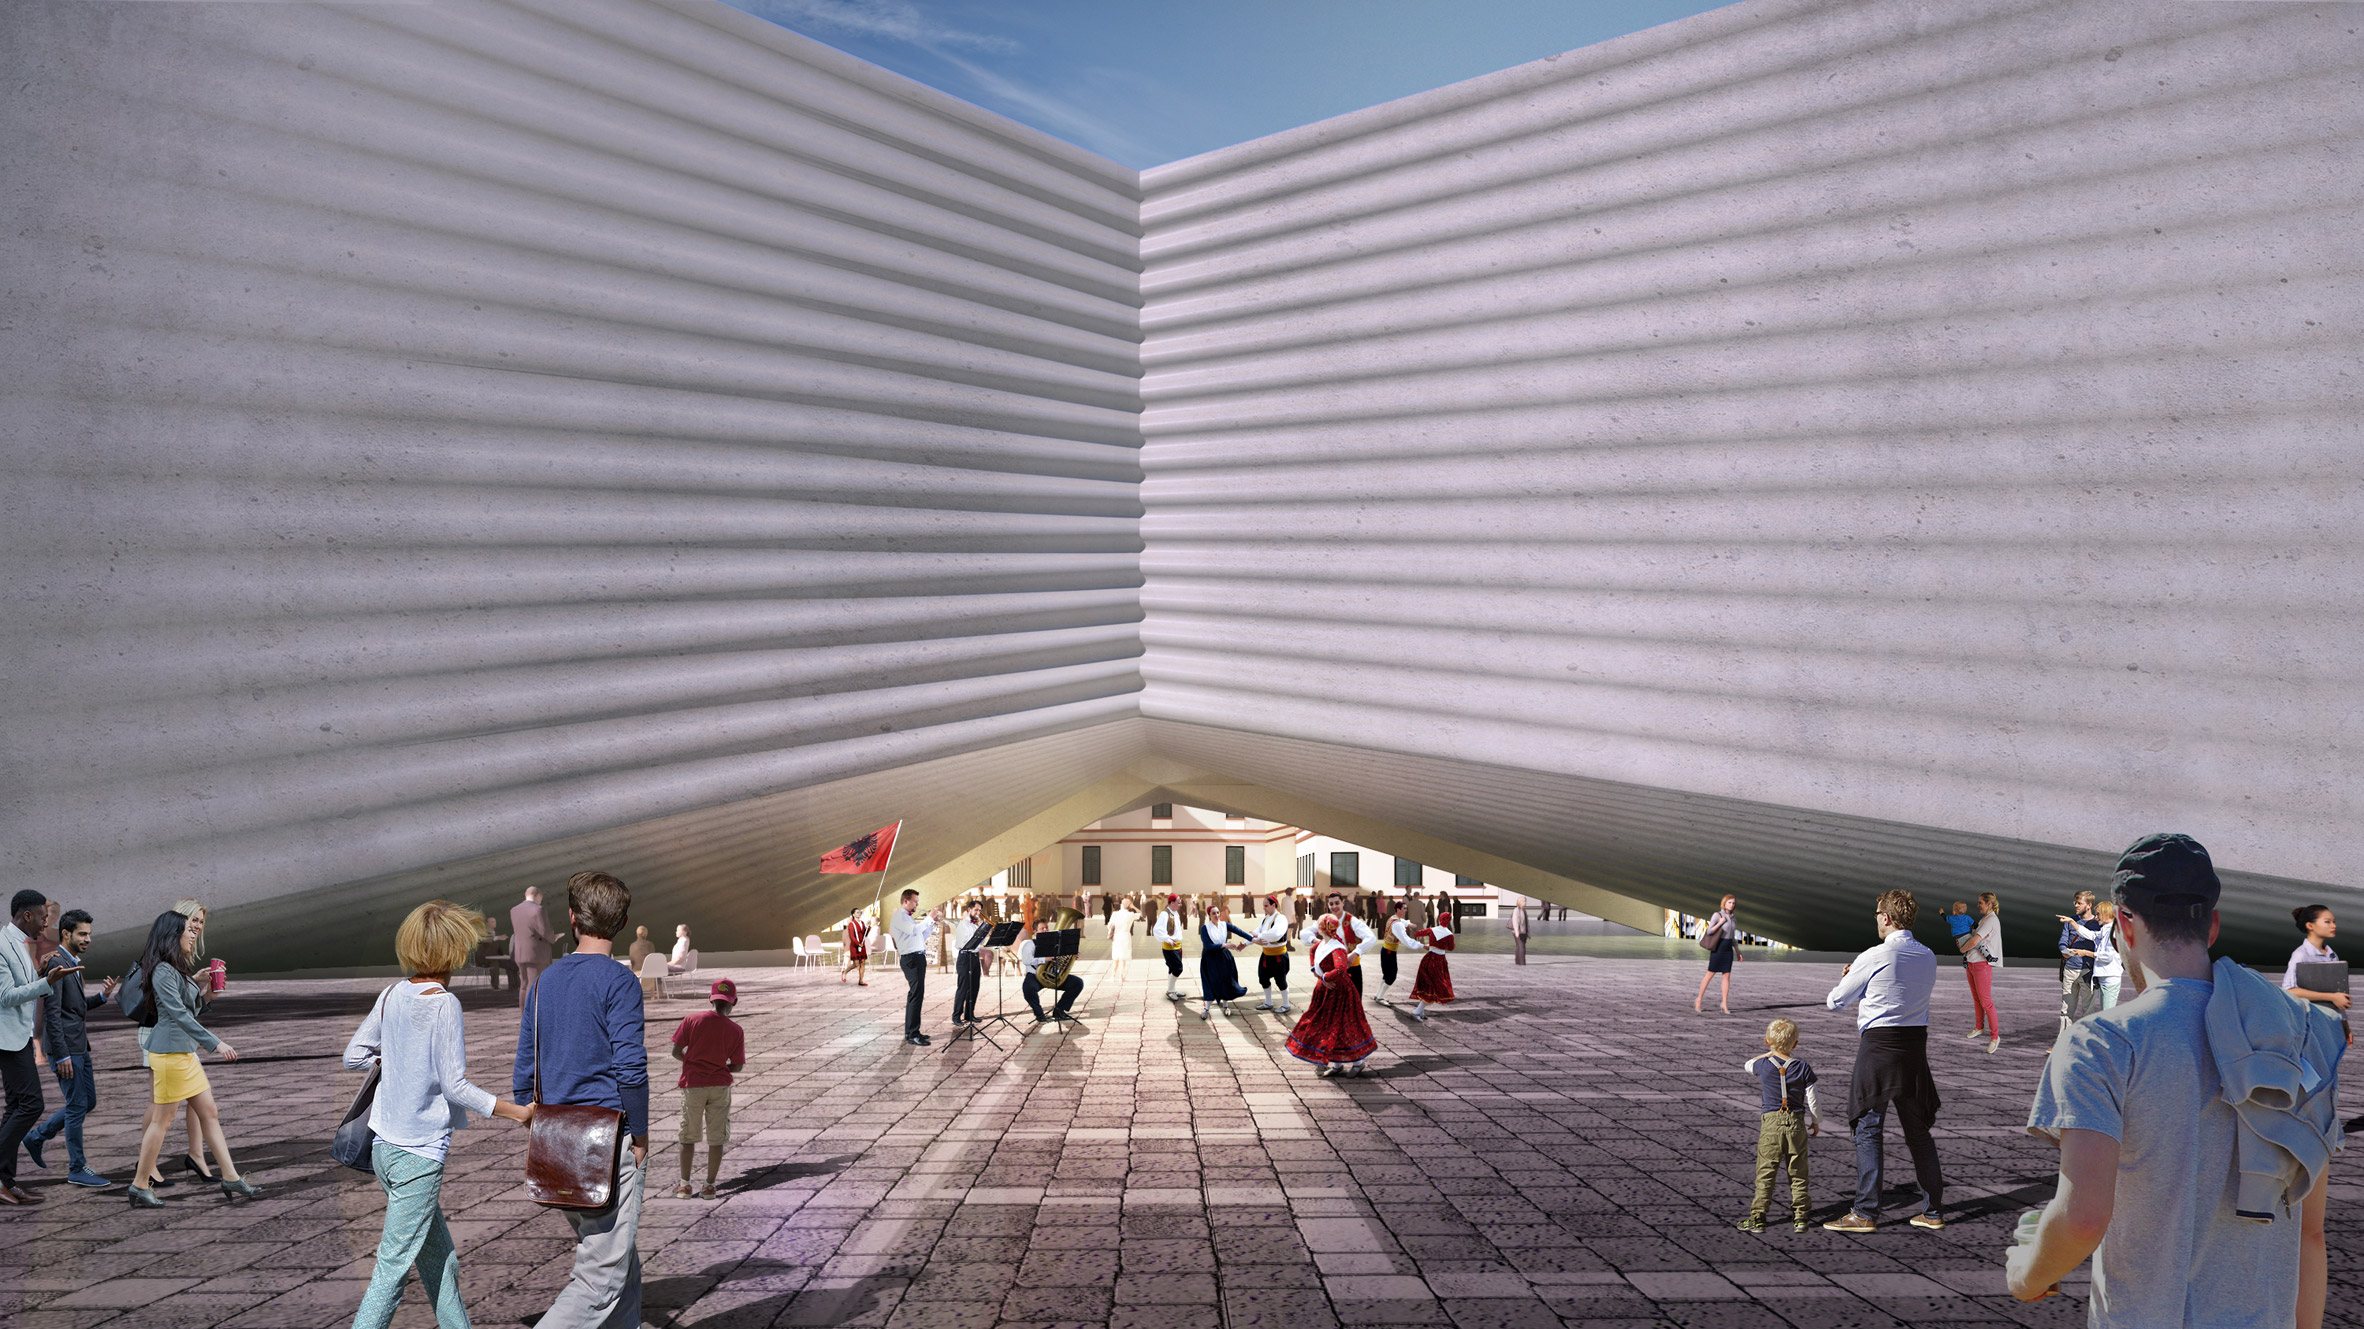 BIG designs "bow-tie-shaped" theatre for Albania's capital city